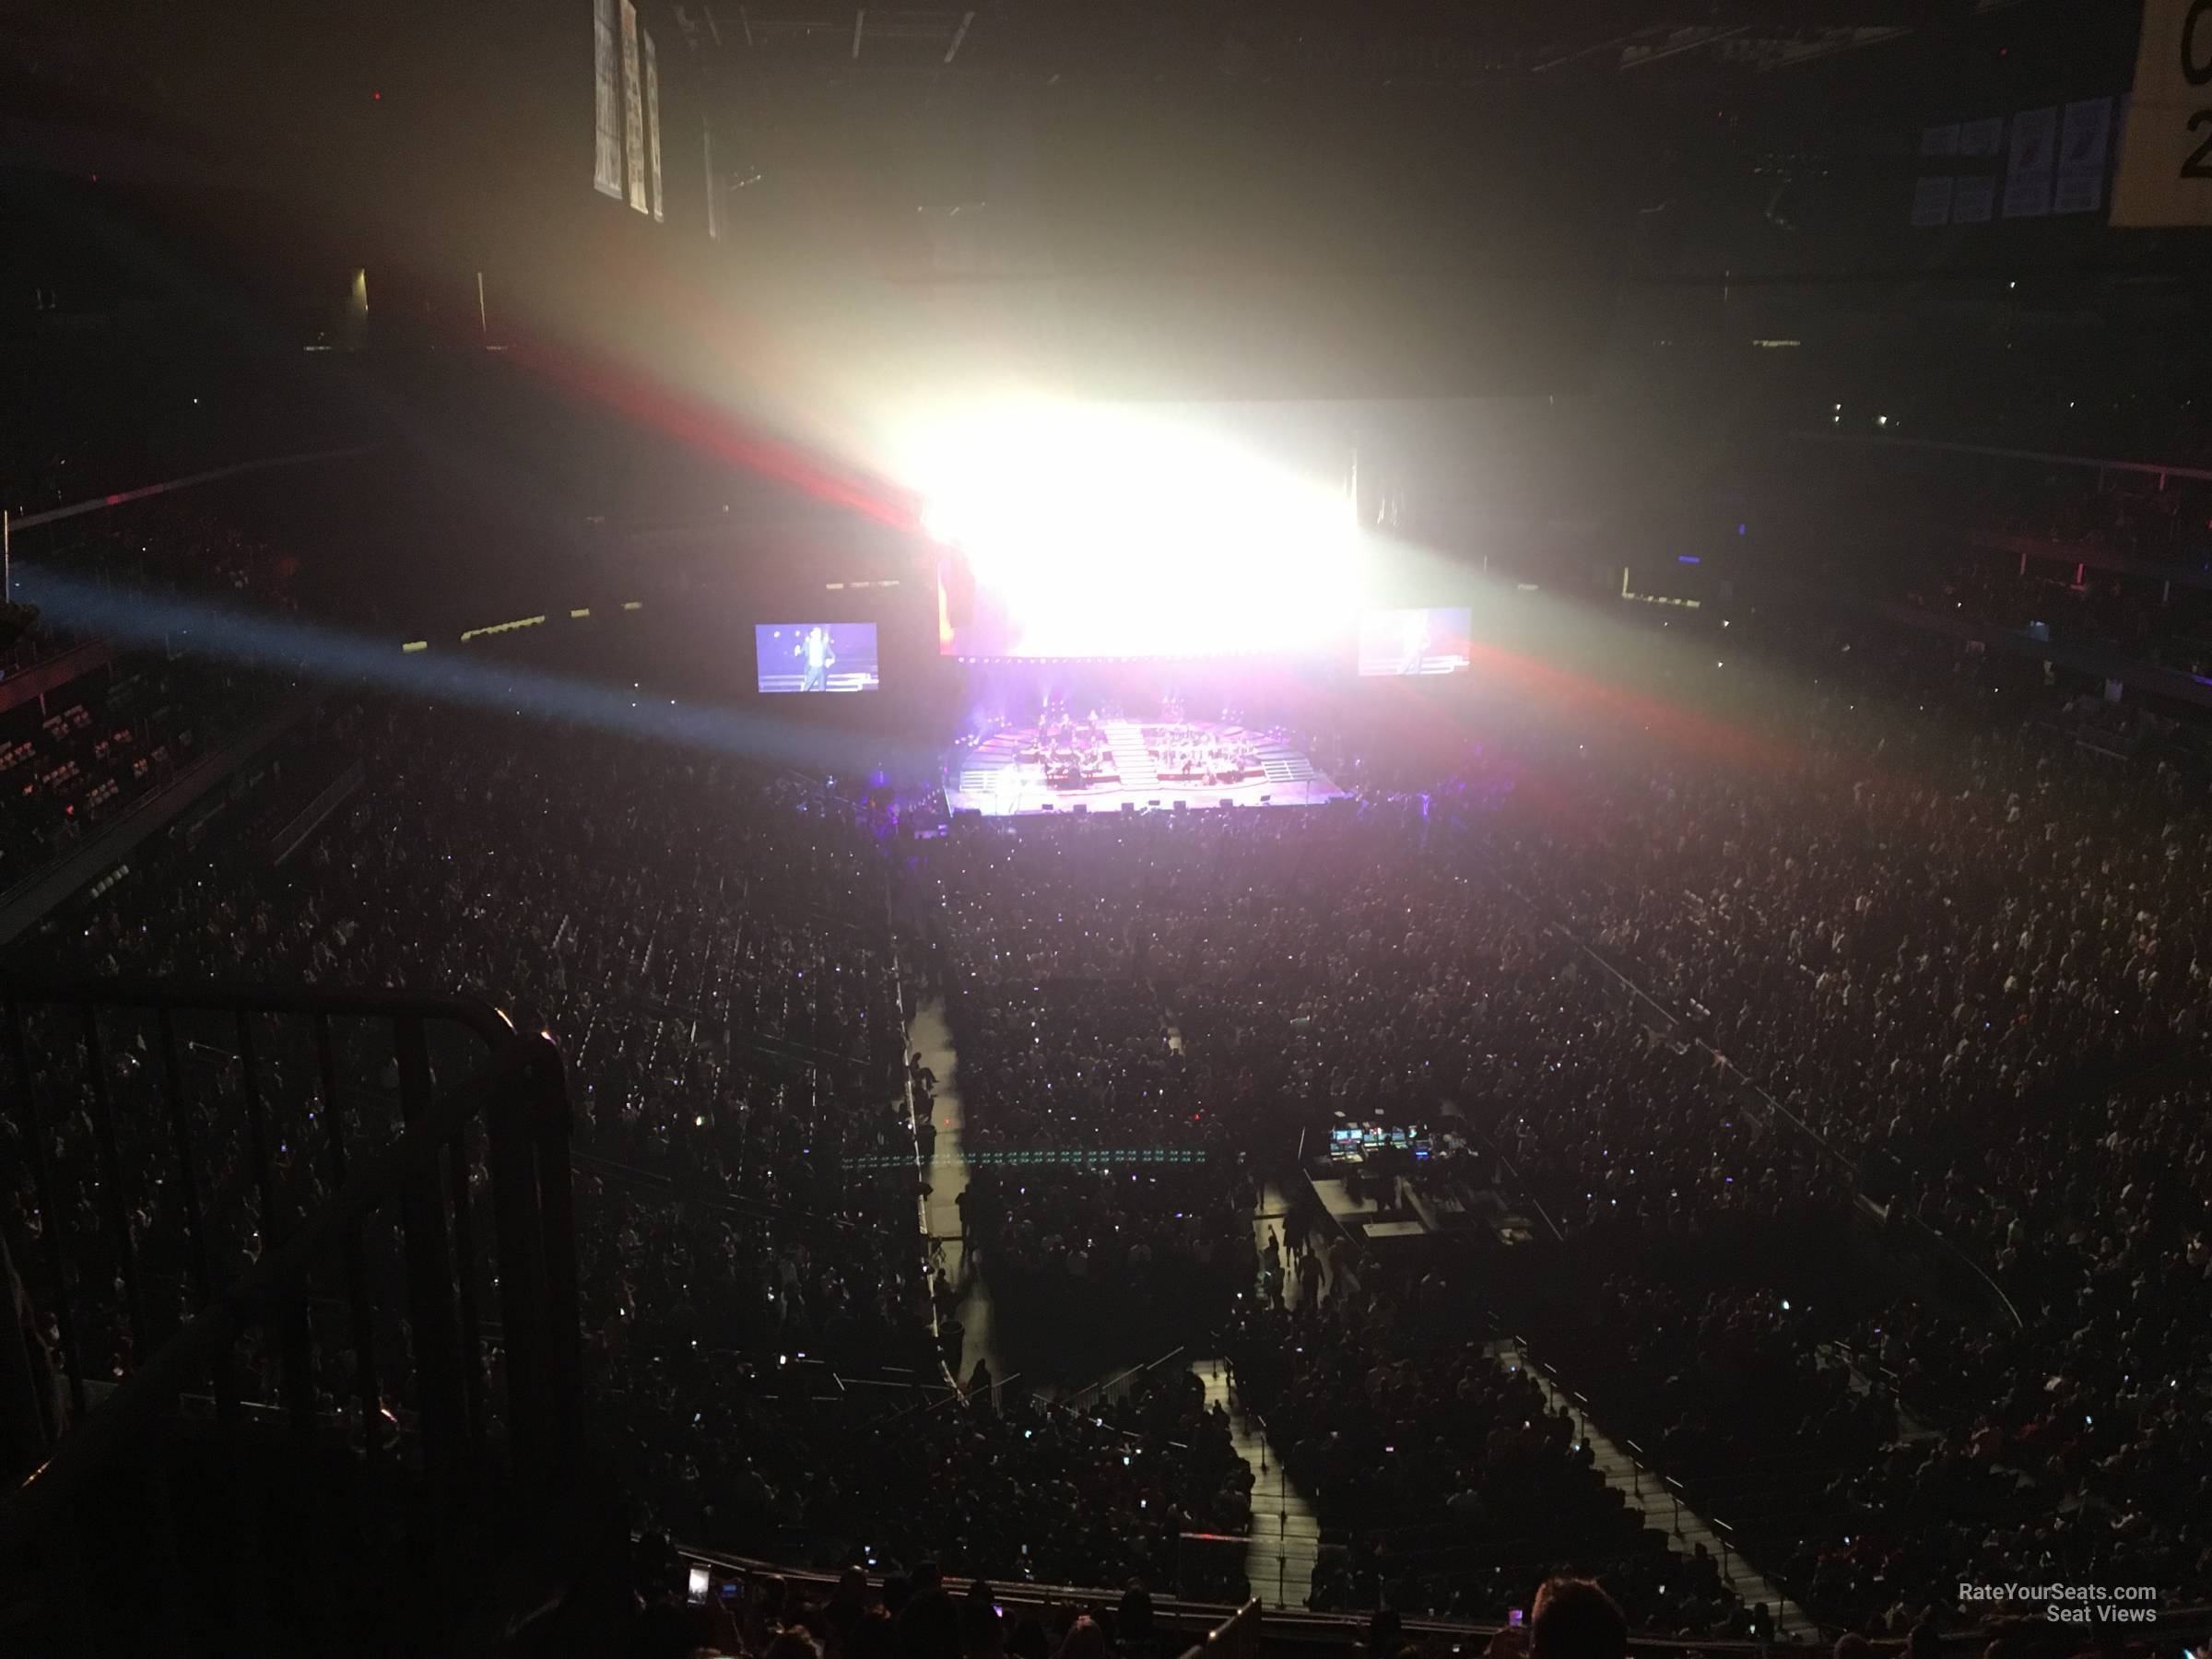 head-on concert view at Prudential Center